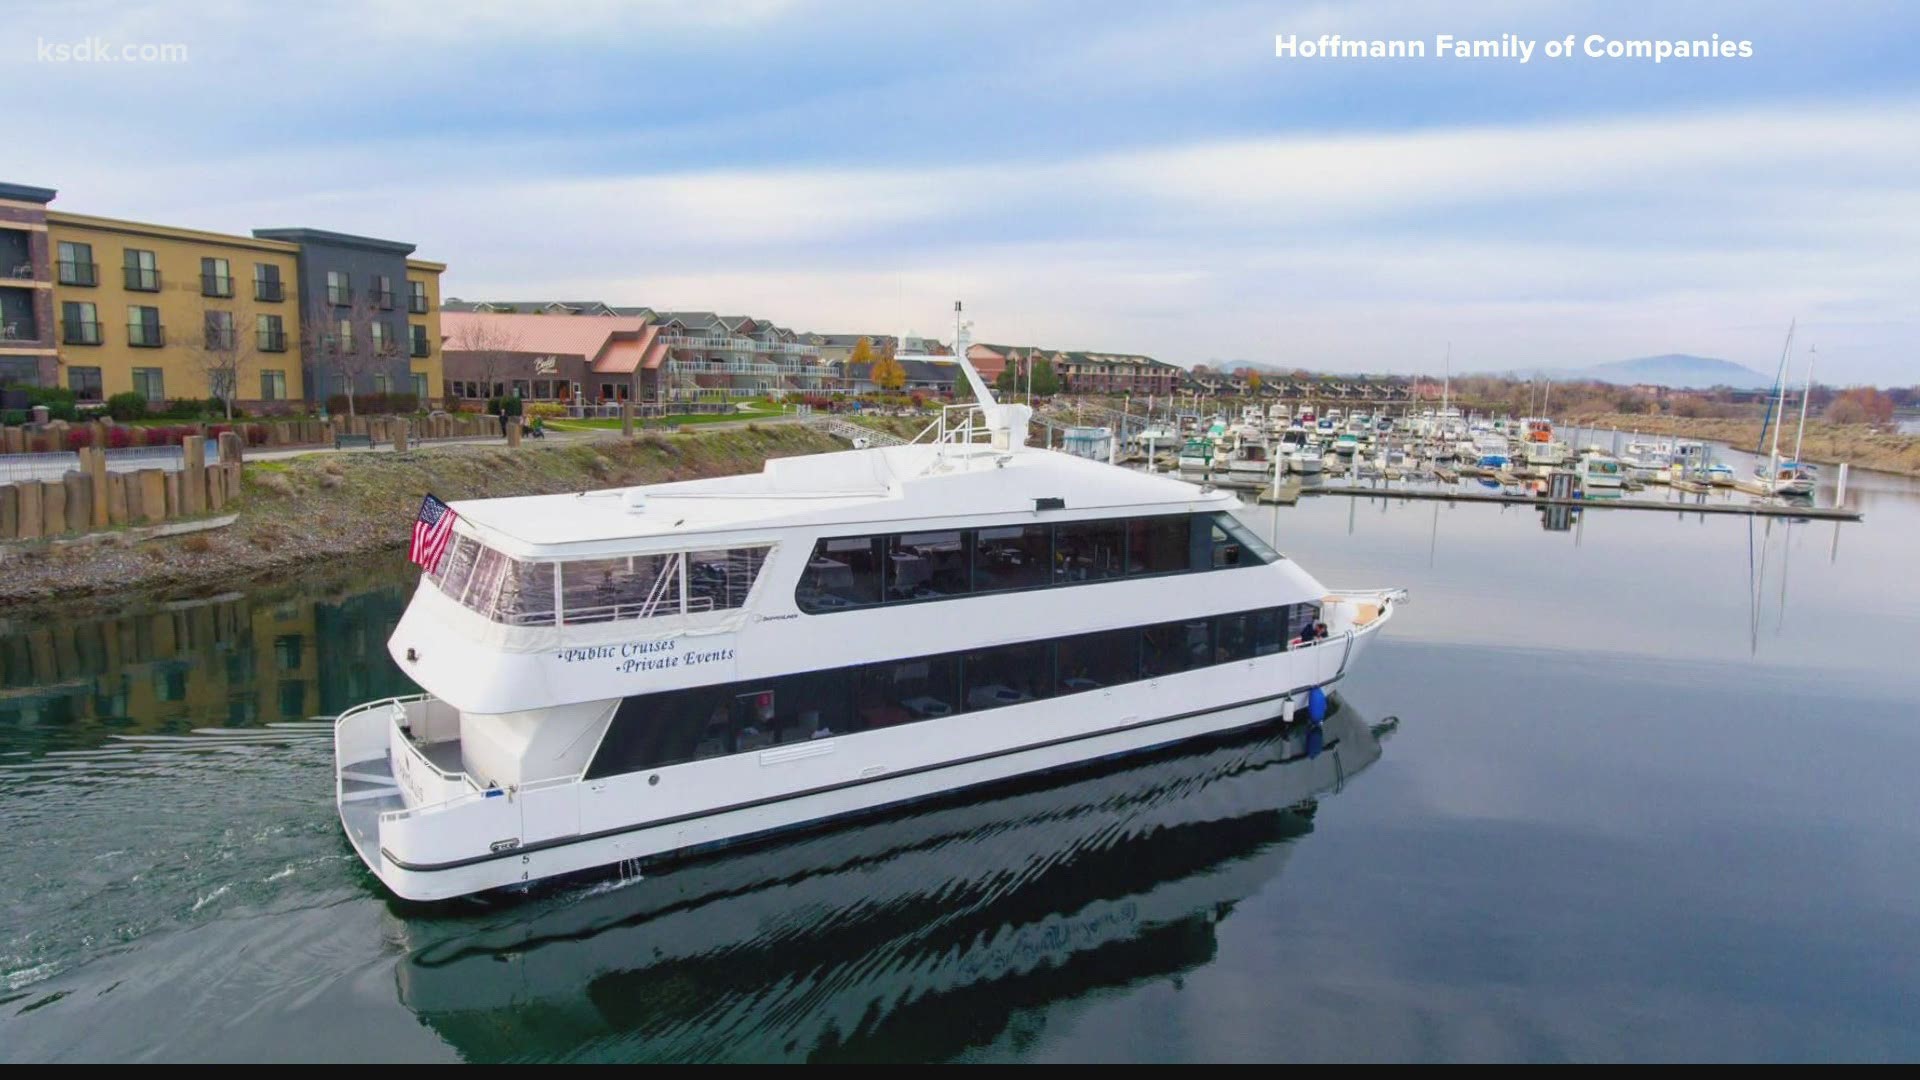 Hoffmann Family of Companies is adding a luxury yacht to its Missouri portfolio in an effort to make Augusta a national wine destination